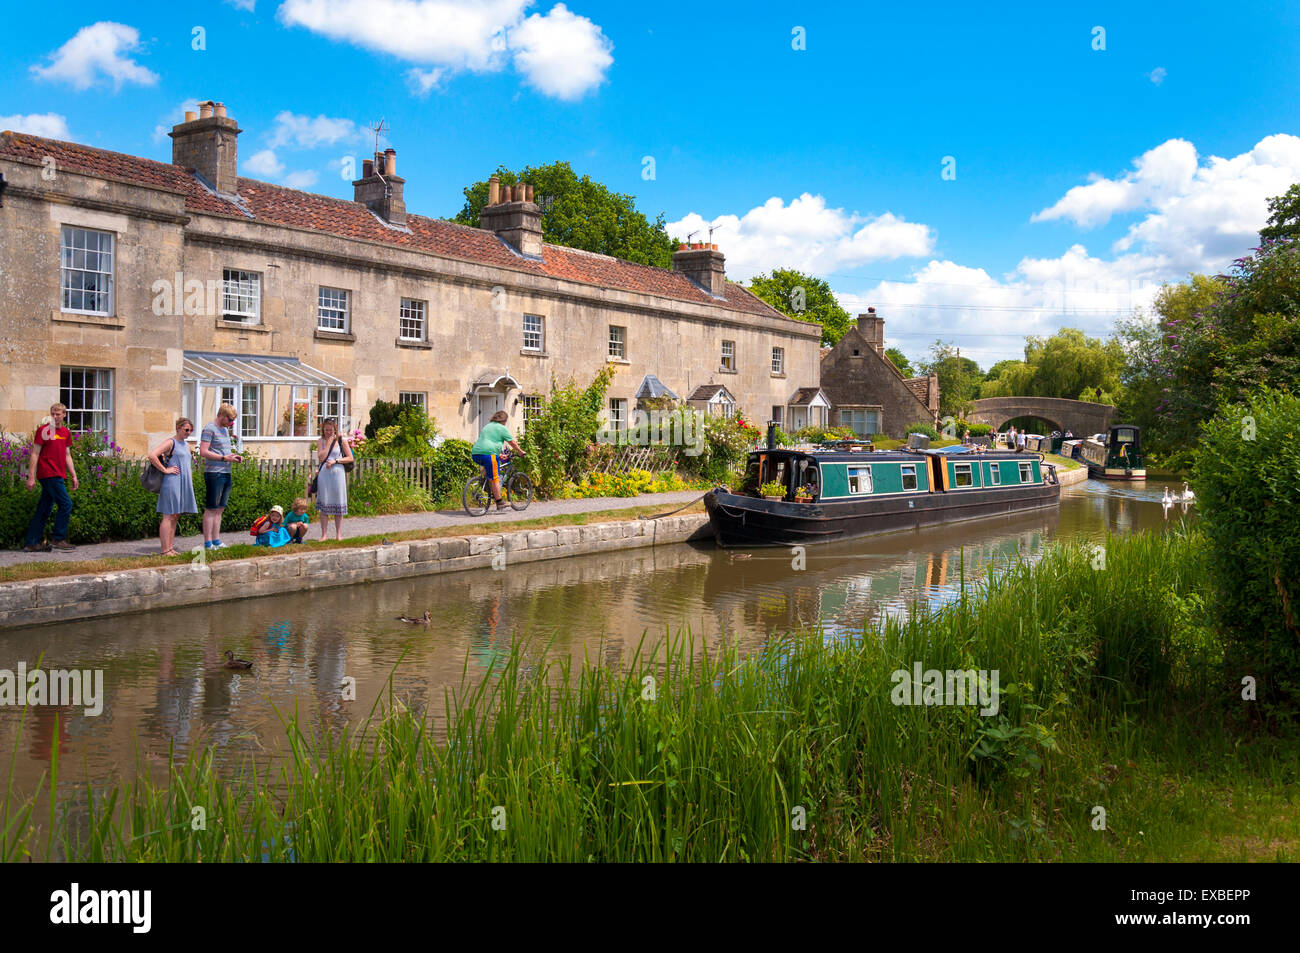 People enjoying a Summer day by Kennet and Avon Canal at Bathampton, Bath, England, UK Stock Photo